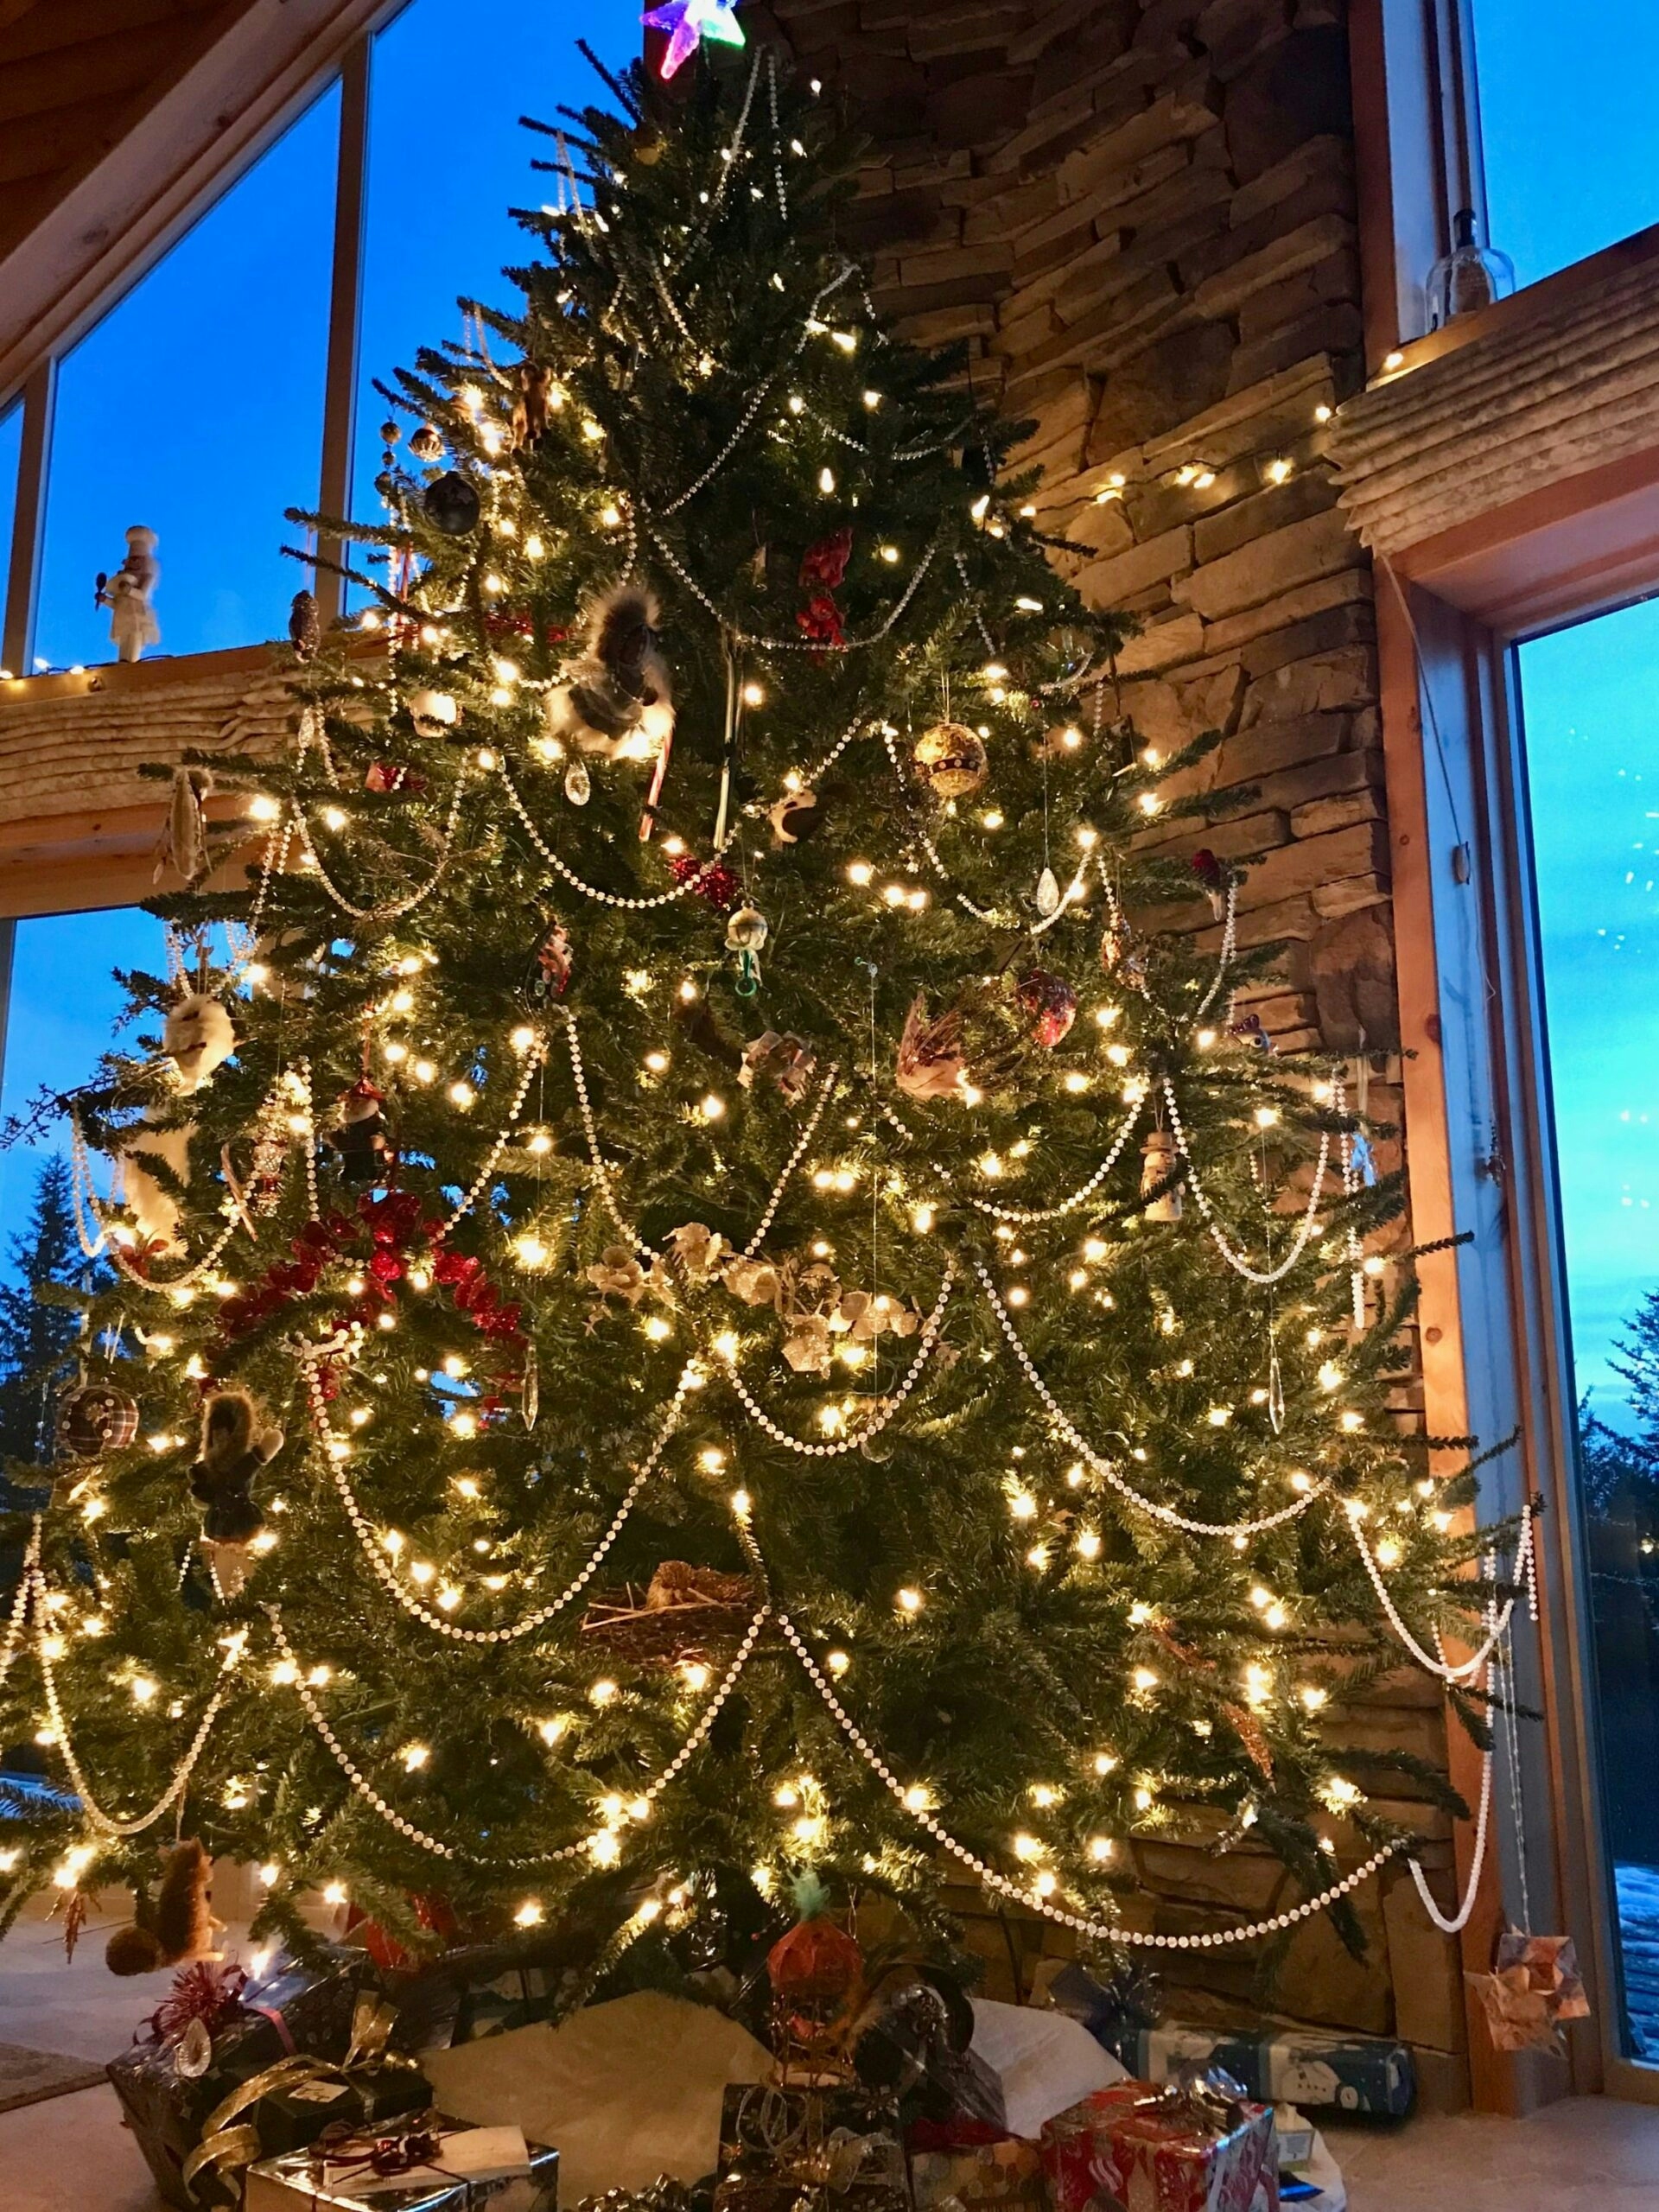 Large Christmas tree adorned with ornaments and lights in front of a window